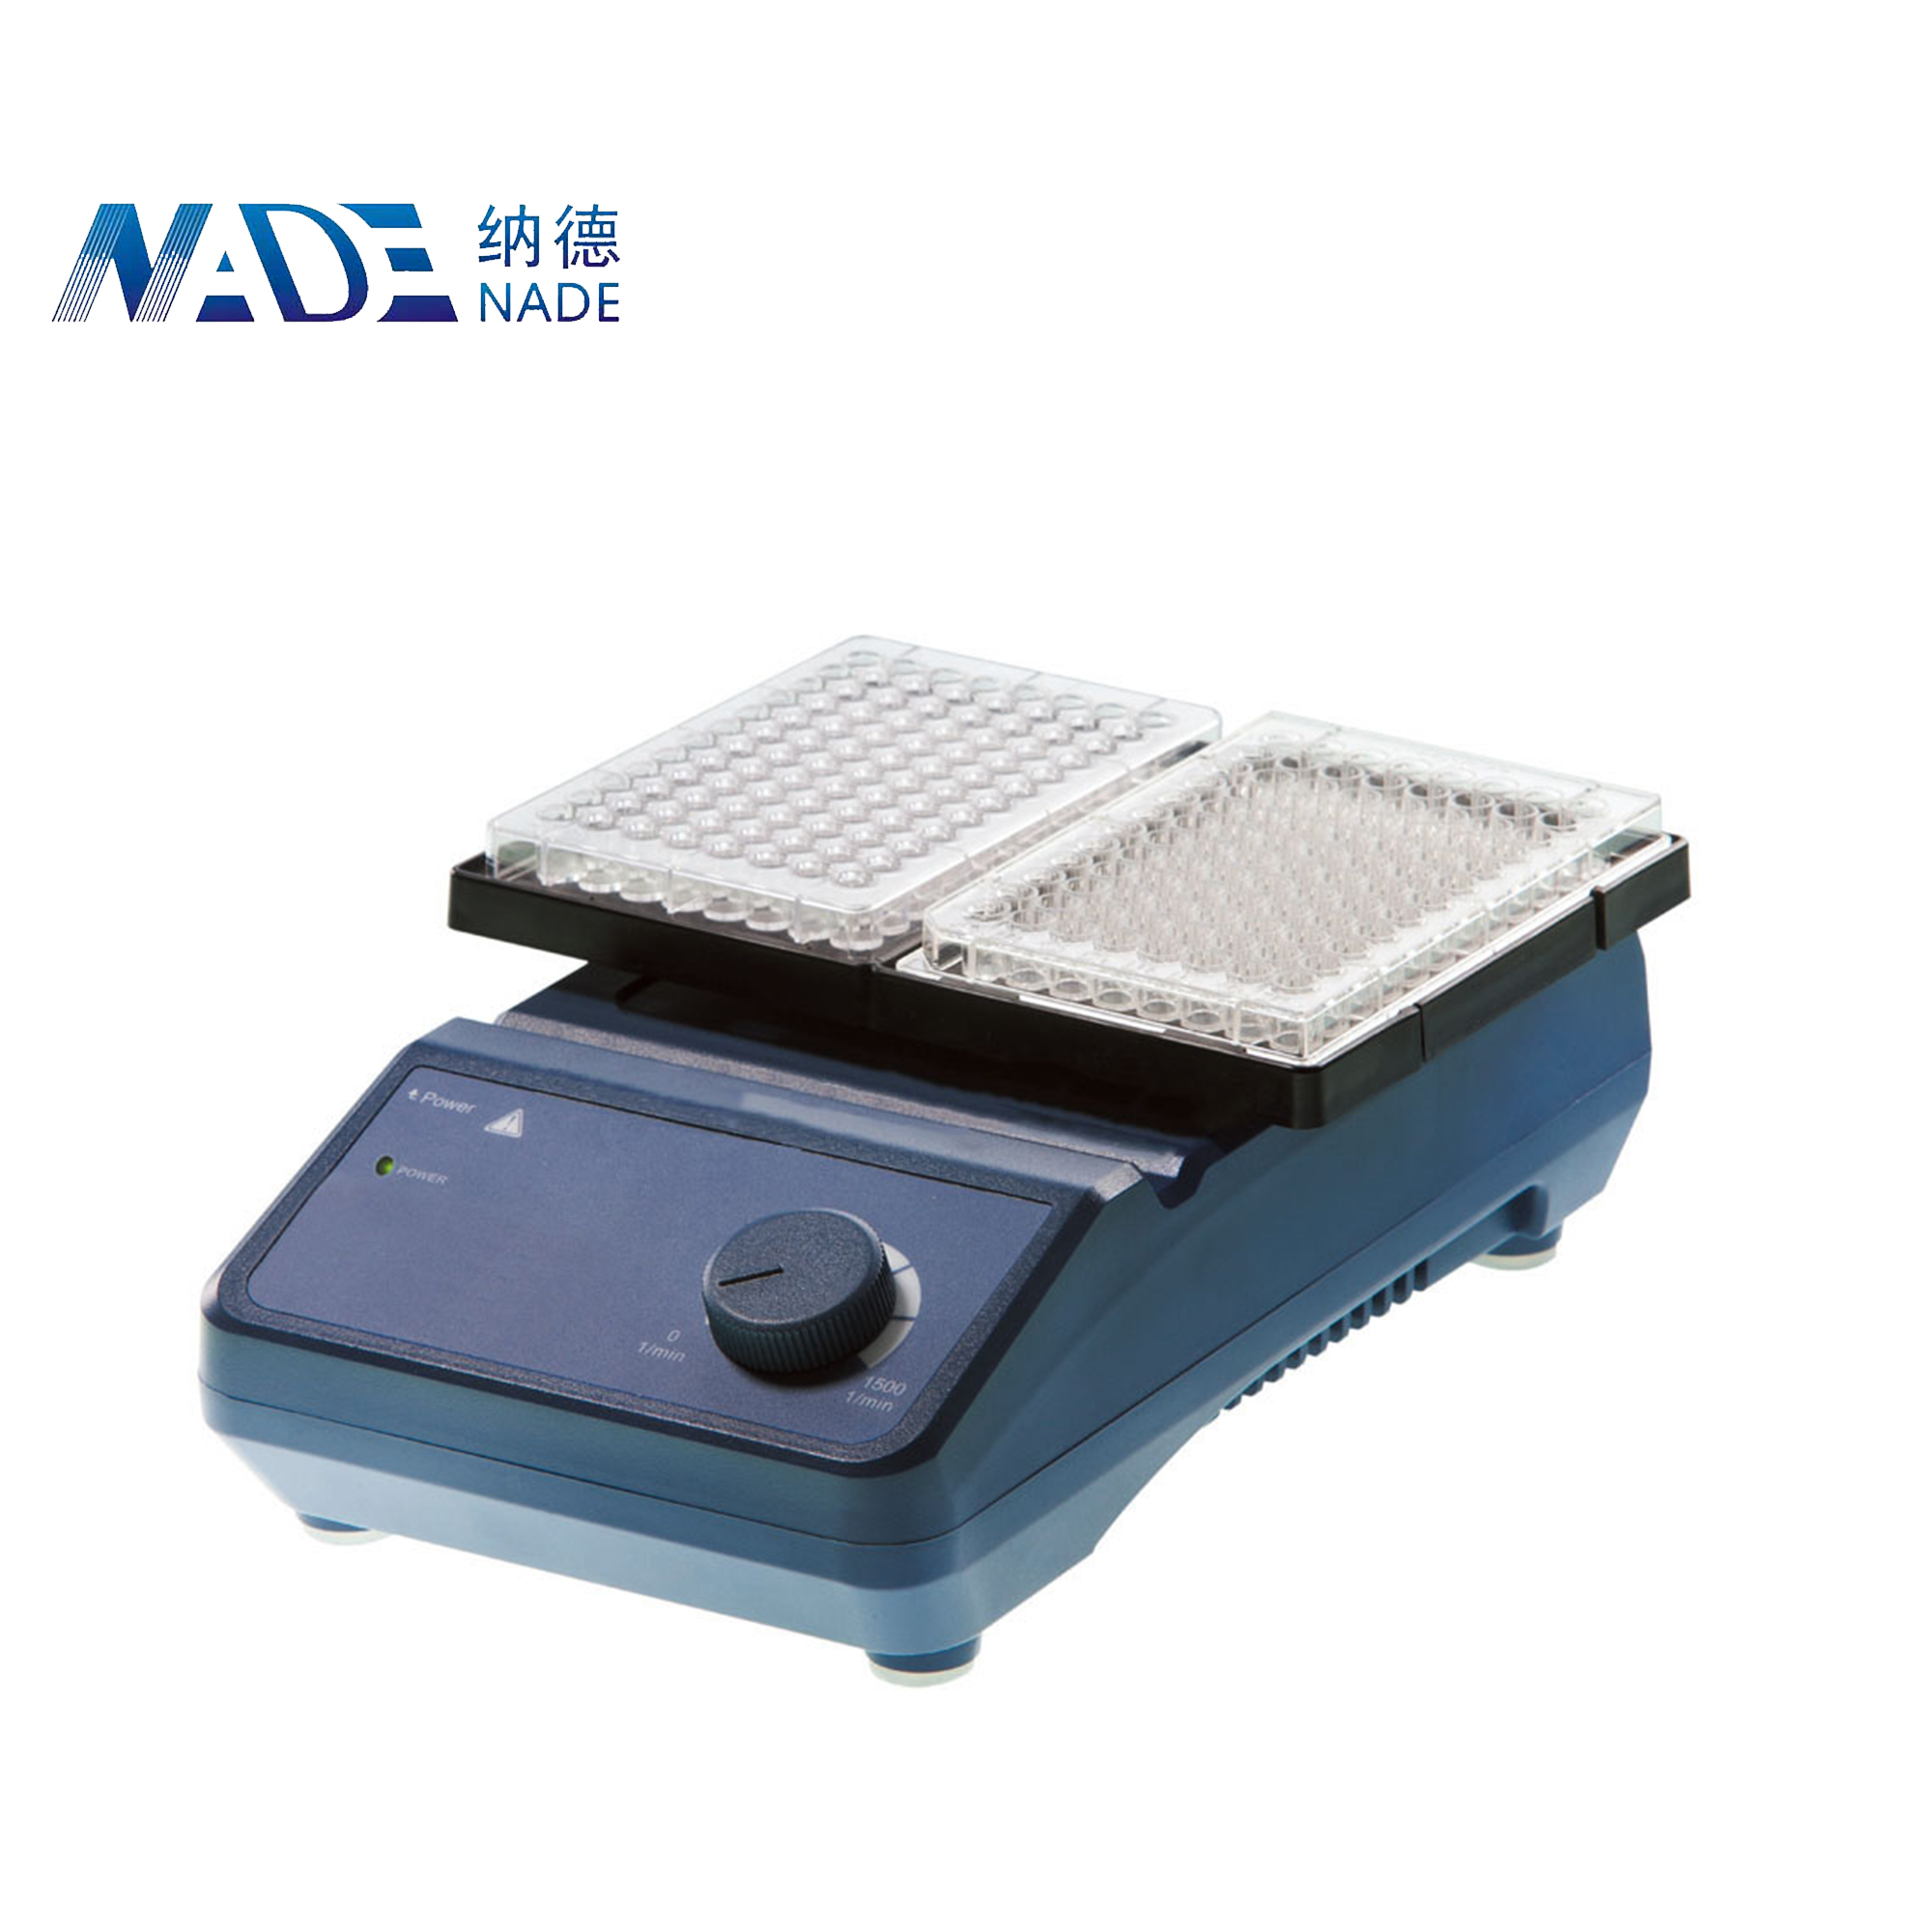 Nade Mixing Equipment MicroPlate Mixer MX-M 0-1500rpm